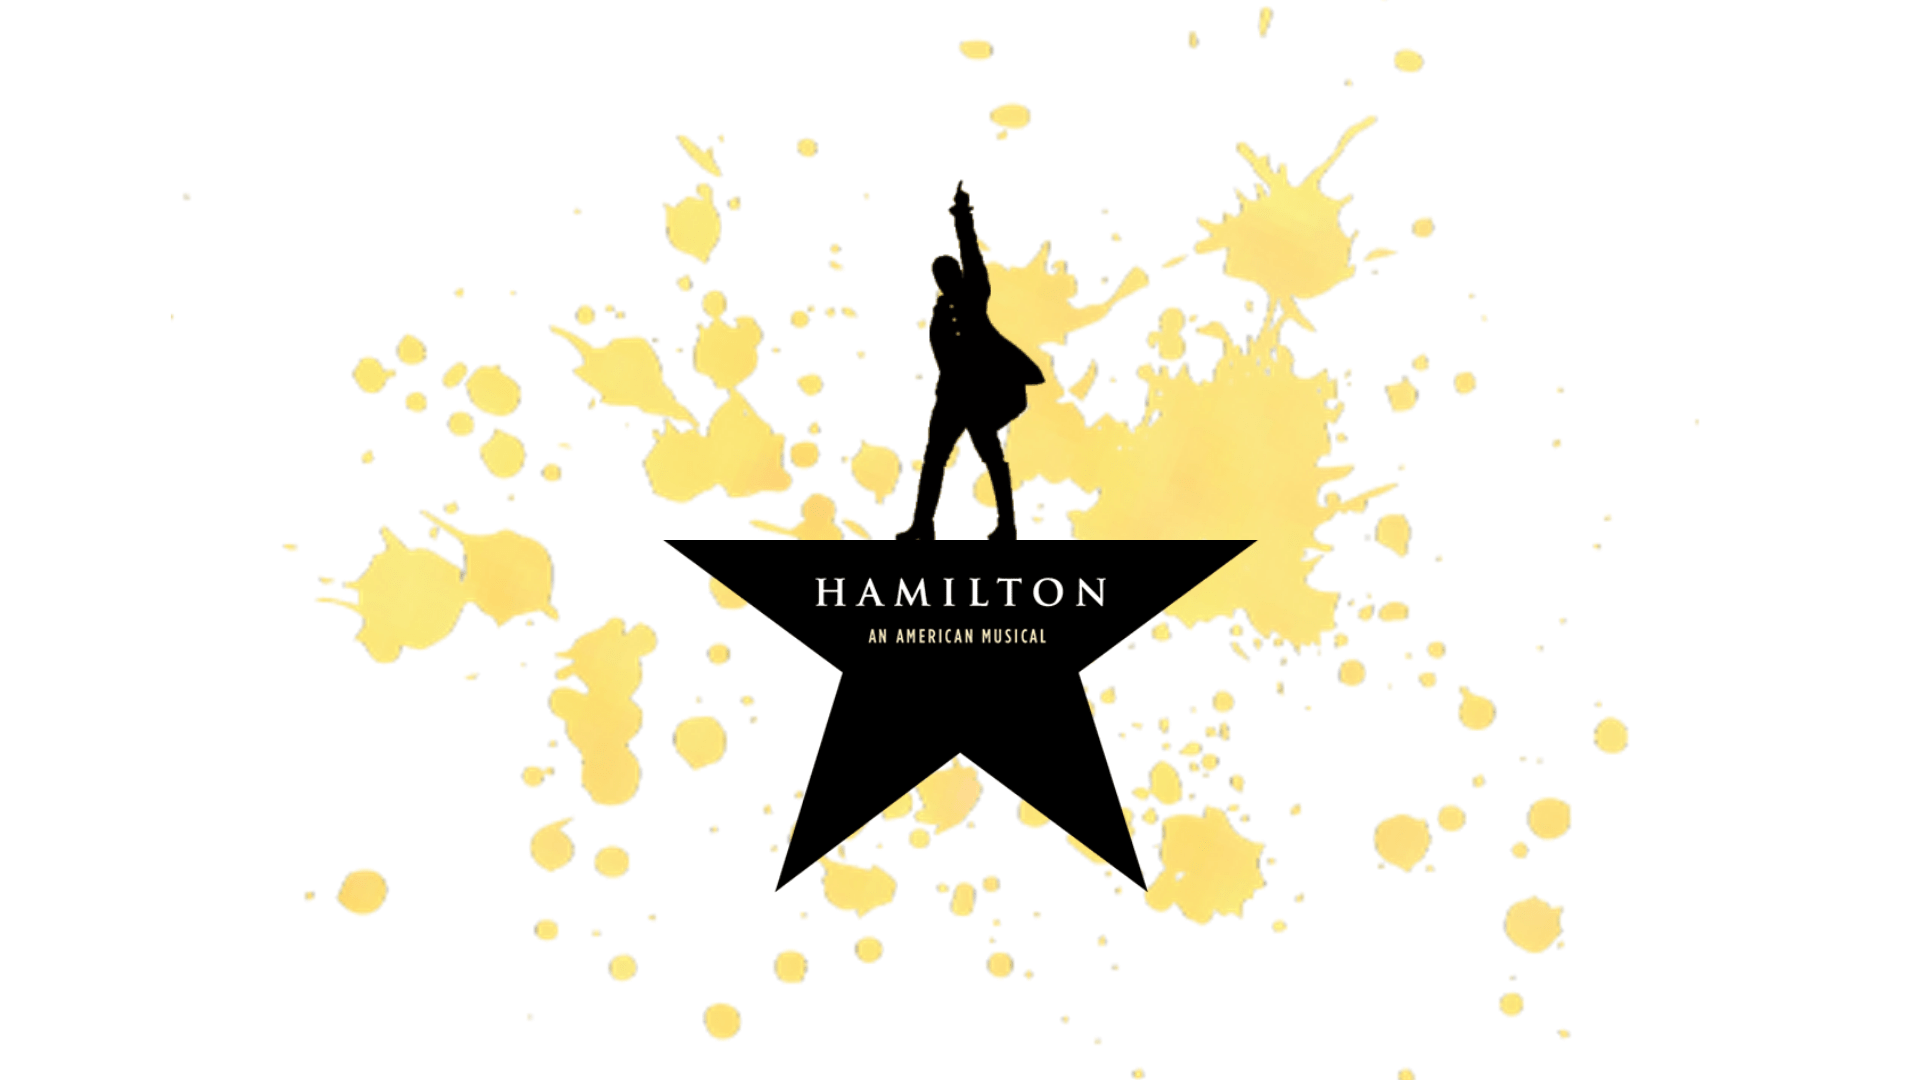 The Hamilton logo with a silhouette of a person standing on a star. - Hamilton